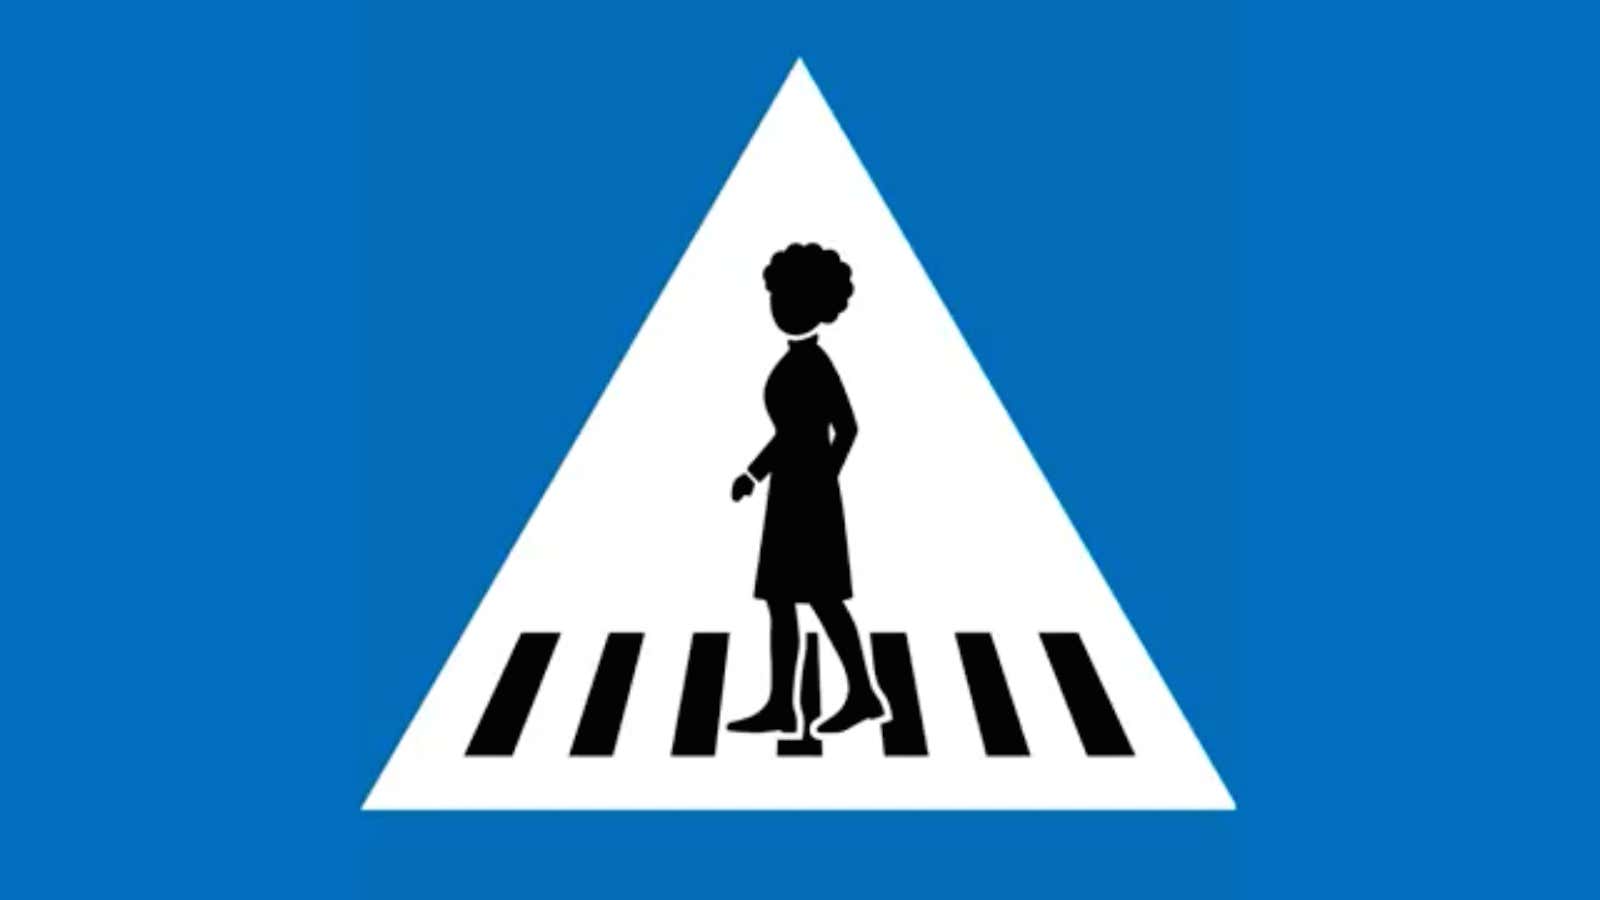 Gender Rules for Crossing the Street